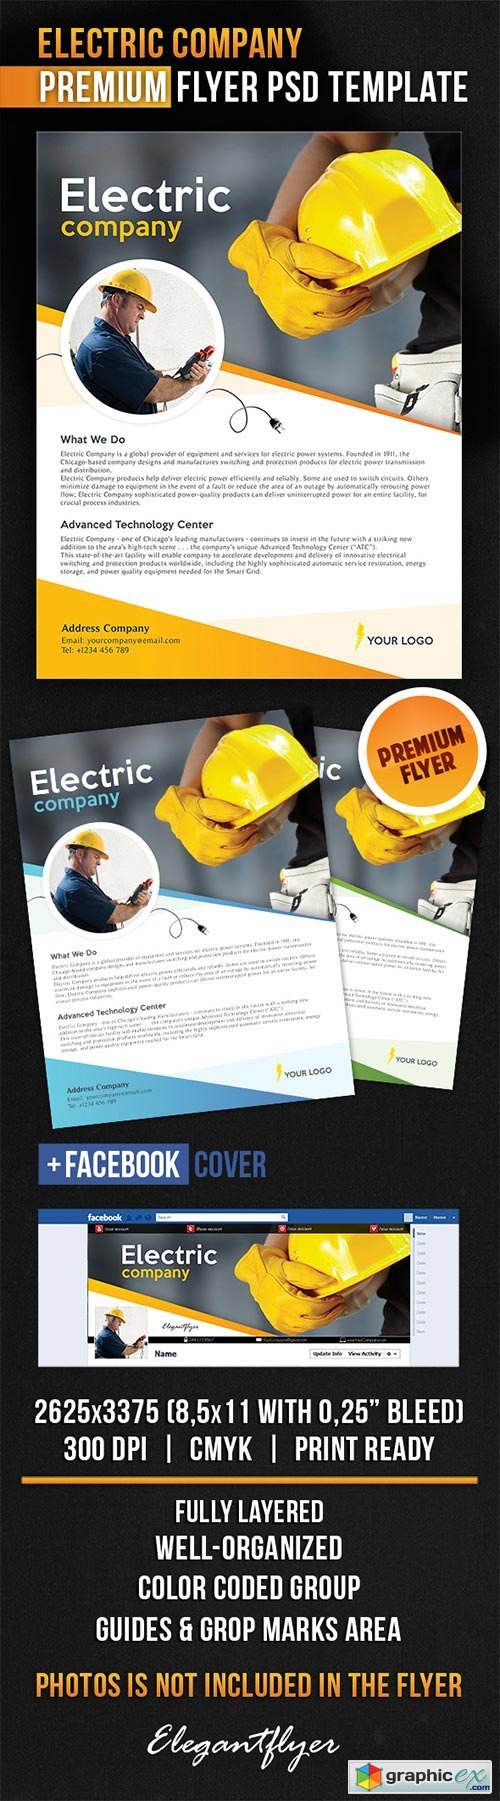 Electric Company Flyer PSD Template + Facebook Cover